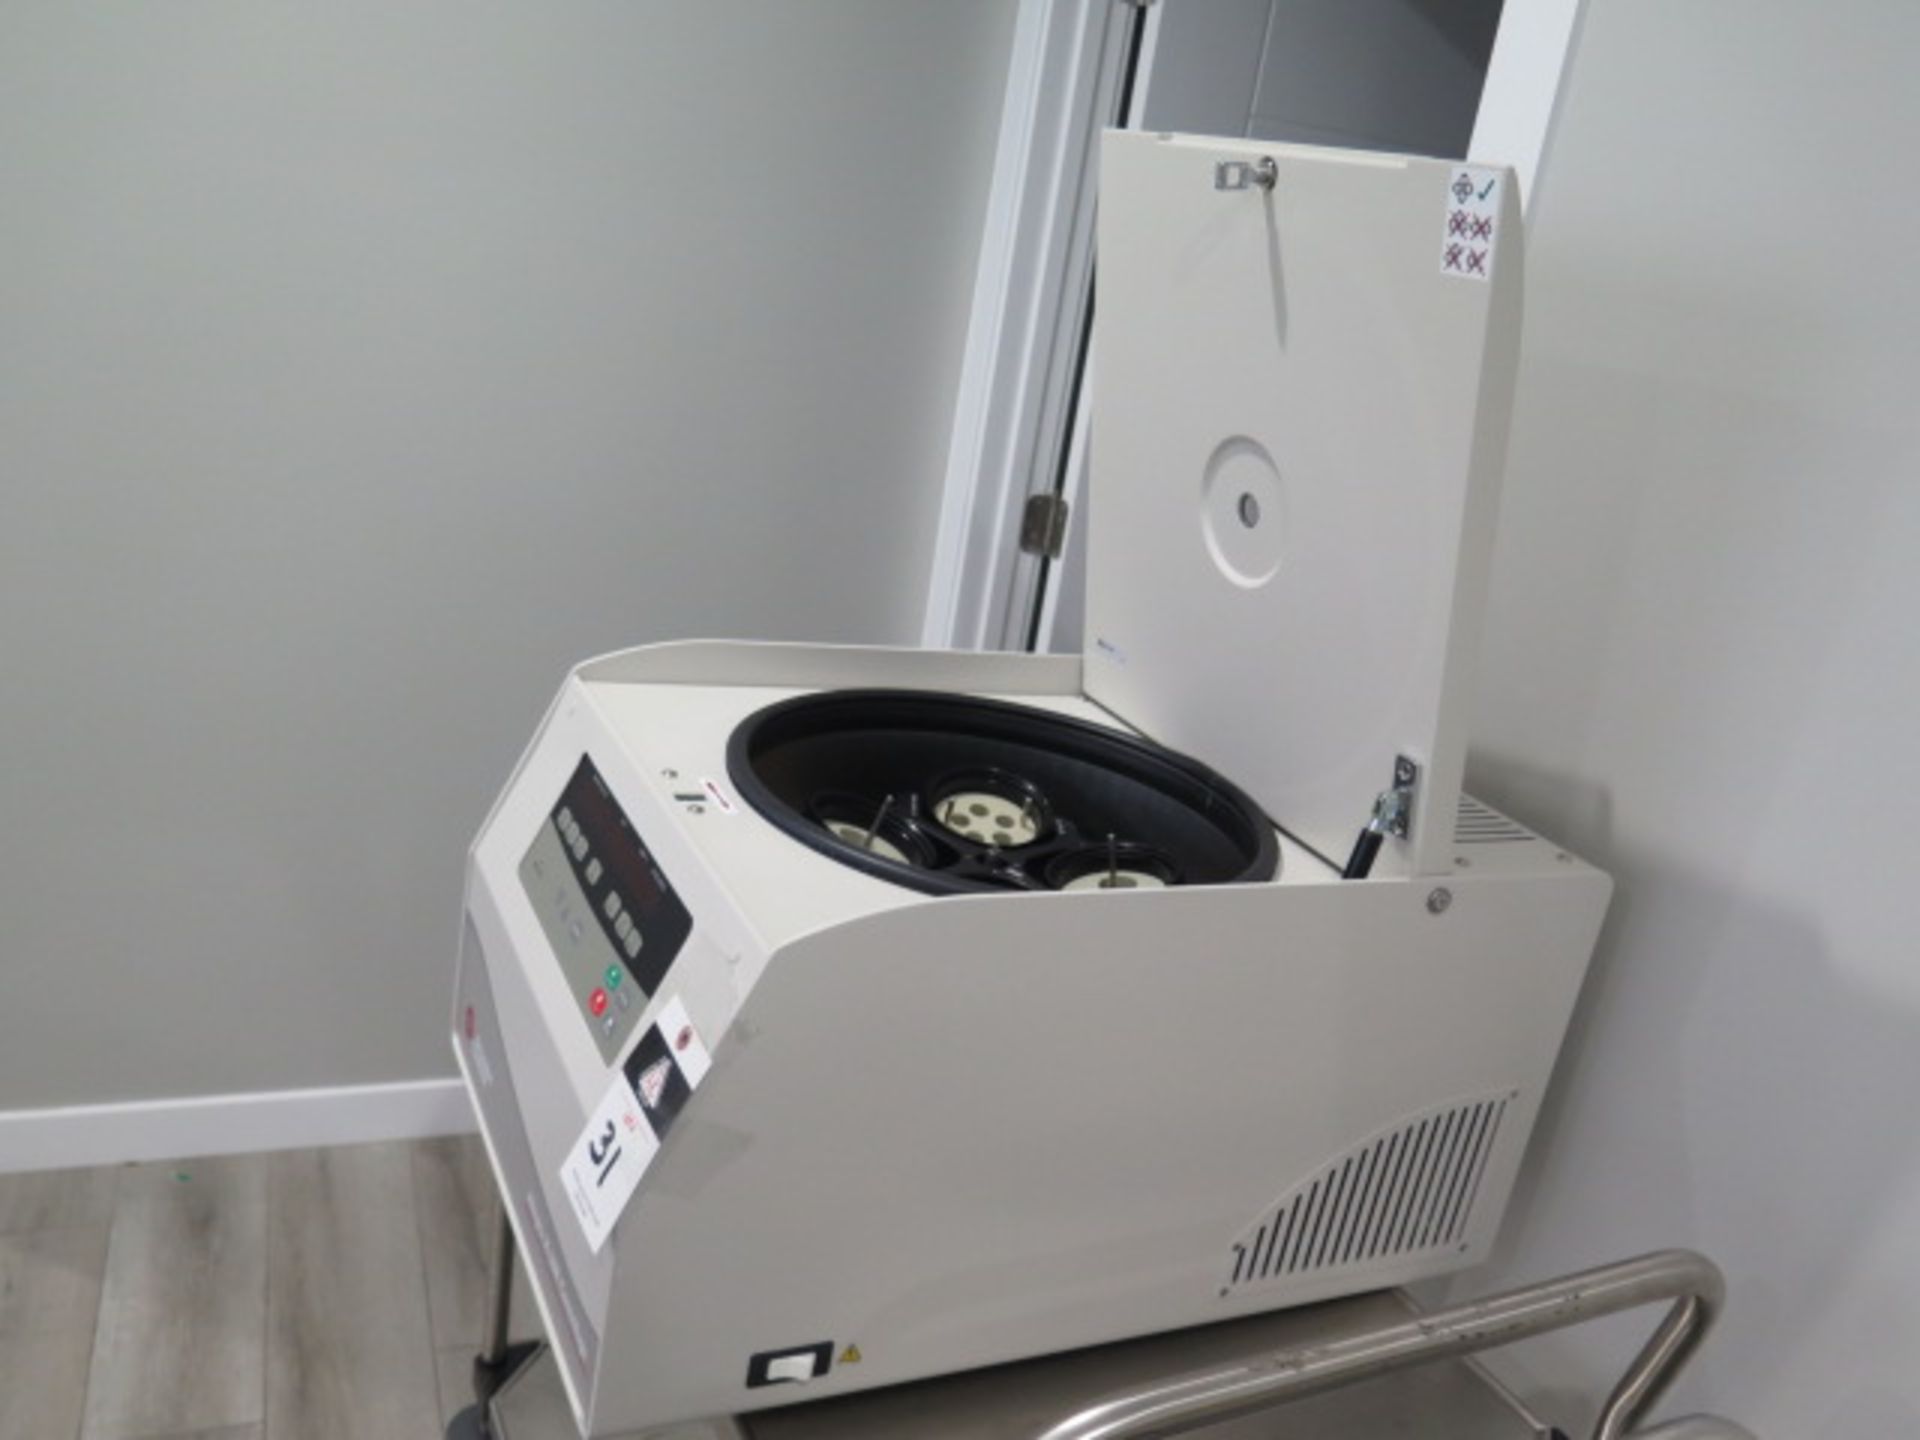 Beckman Coulter Allegra X-30R Centrifuge s/n ALZ19A083 (SOLD AS-IS - NO WARRANTY) - Image 3 of 11